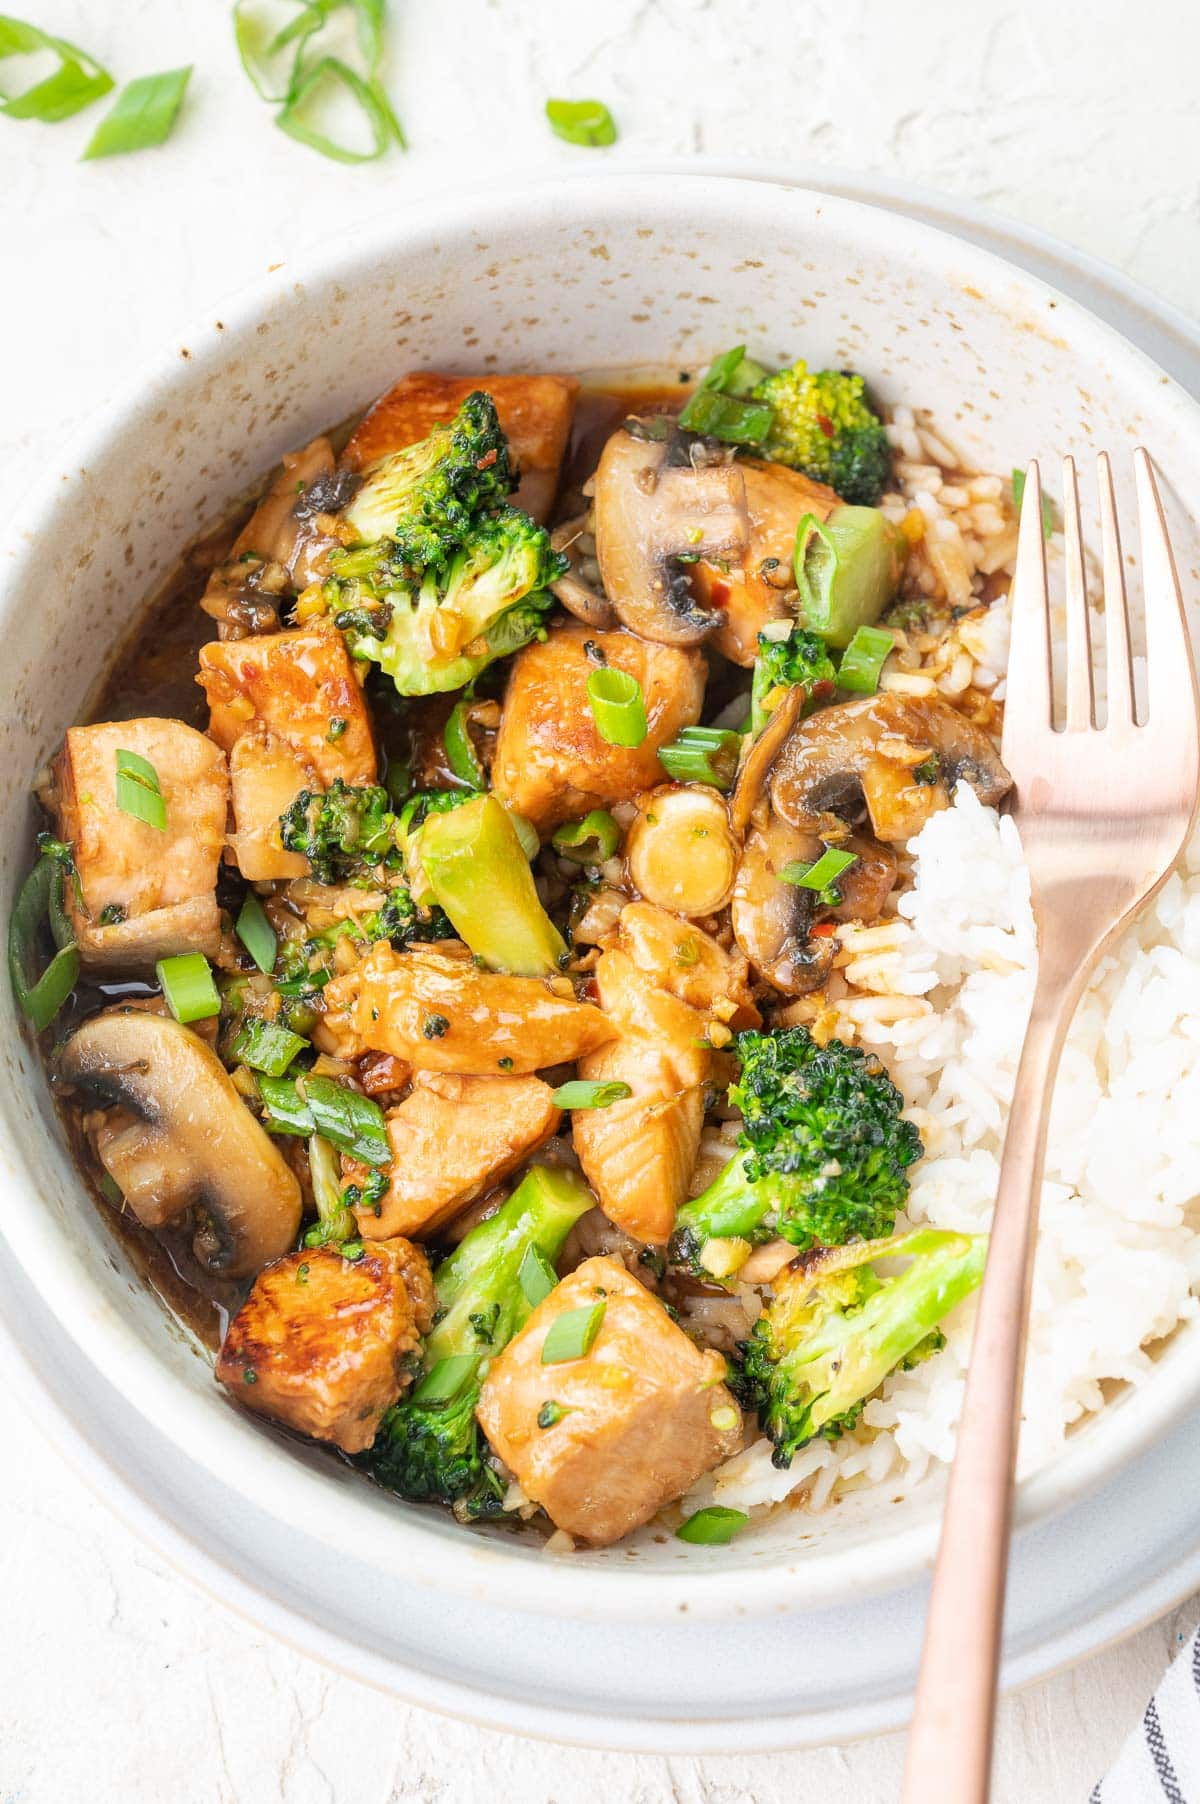 A close up photo of salmon stir fry with broccoli, mushrooms, and rice in a white bowl.